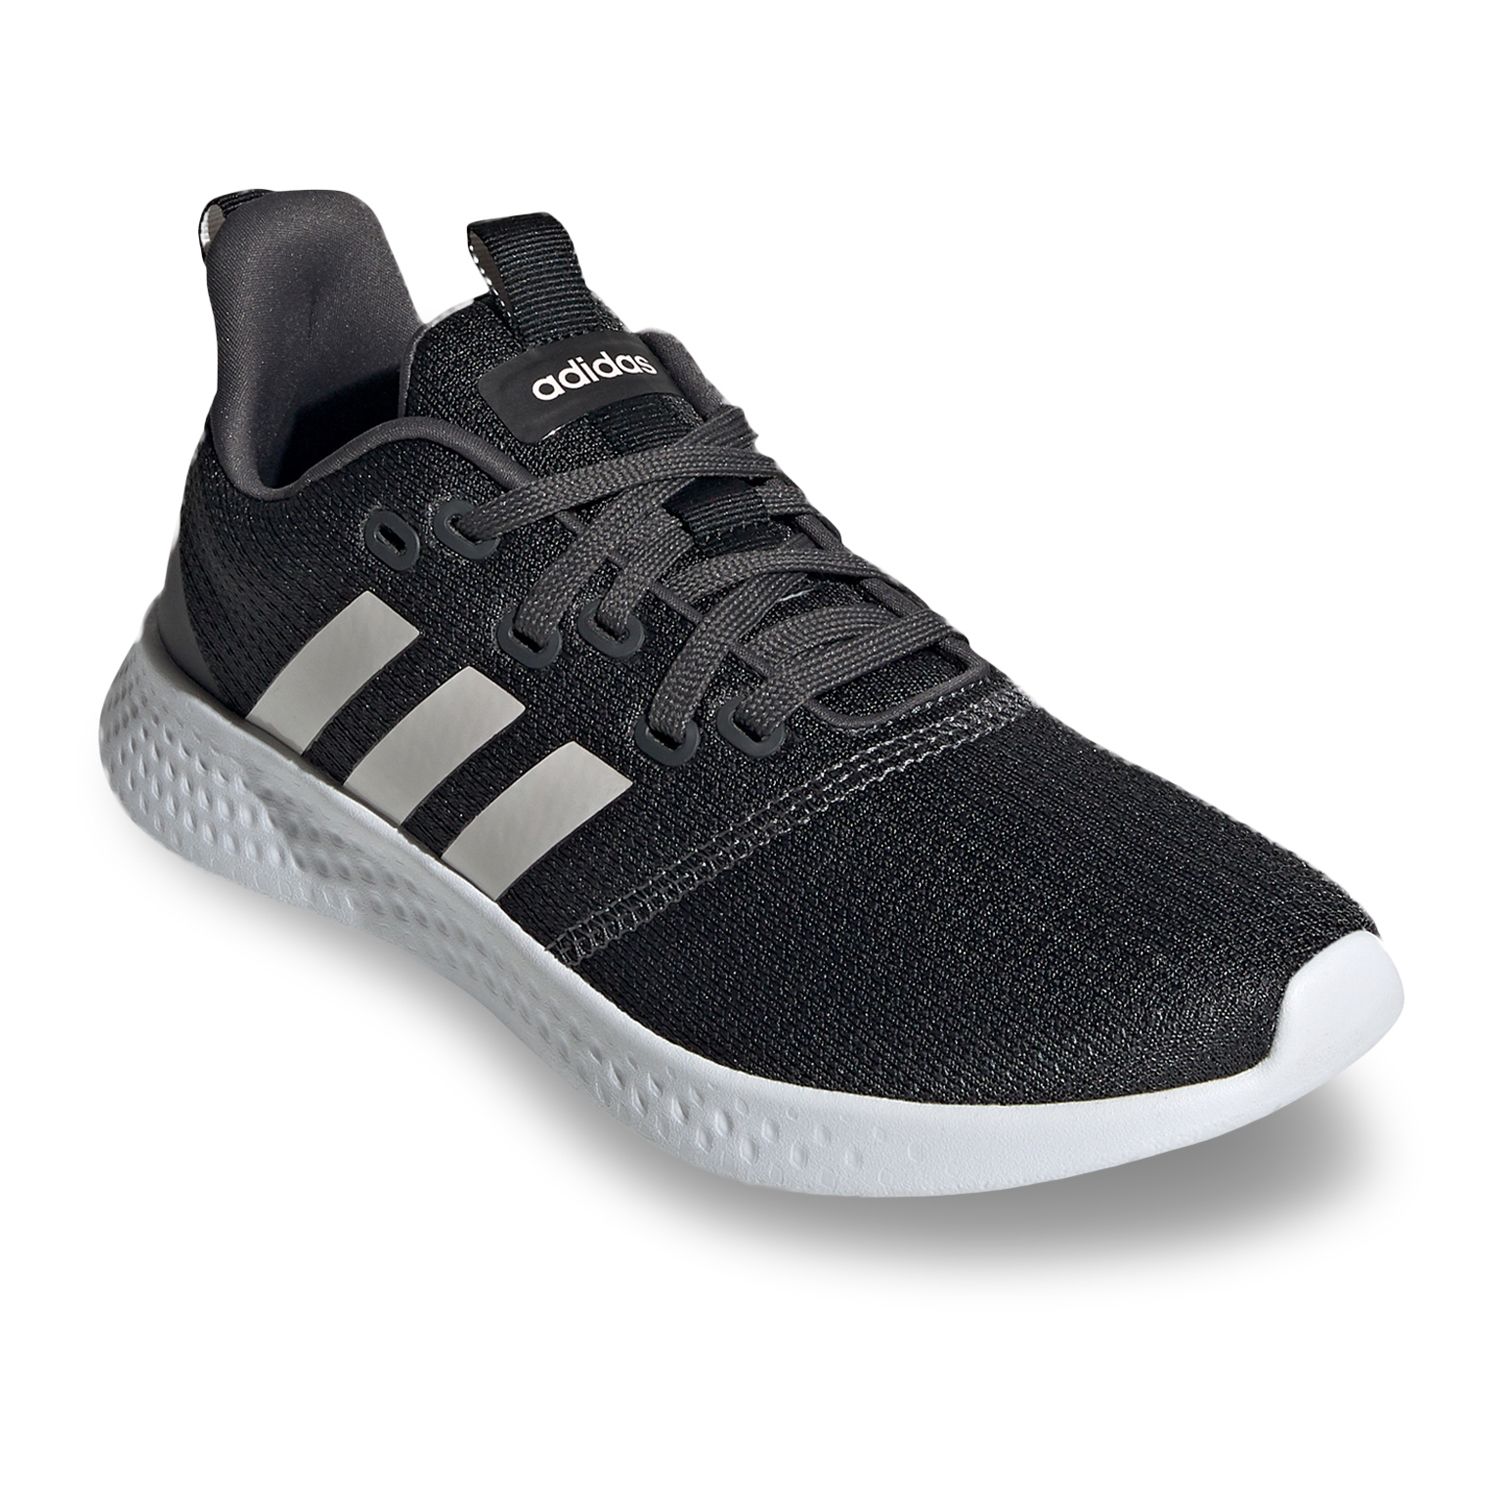 grey and black adidas shoes